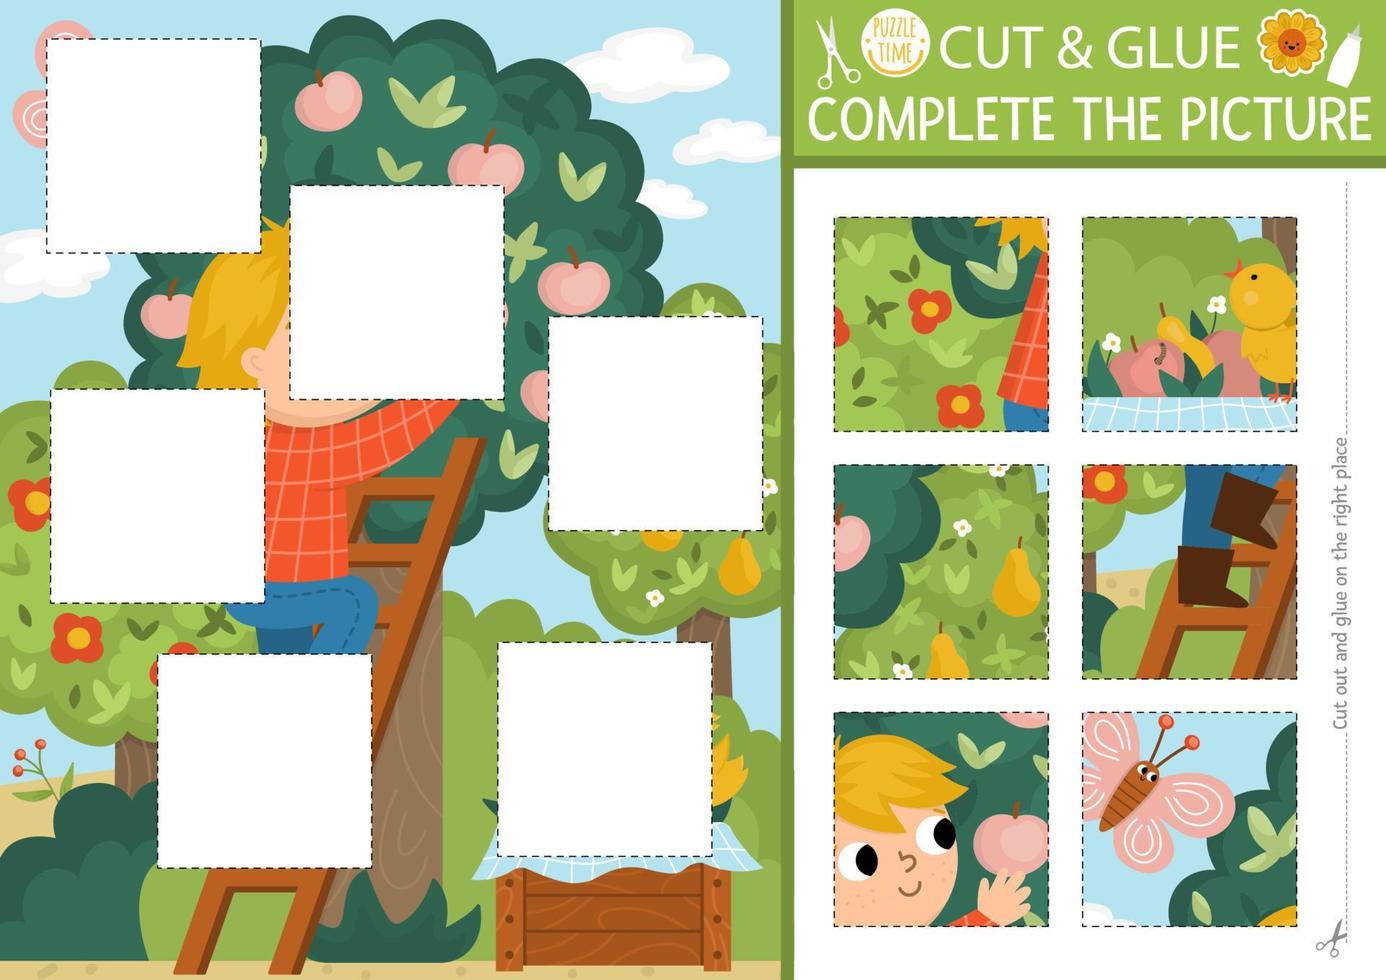 Vector on the farm cut and glue activity. Garden crafting game with cute farmer and apple tree. Fun printable worksheet for children. Find the right piece of the puzzle. Complete the picture